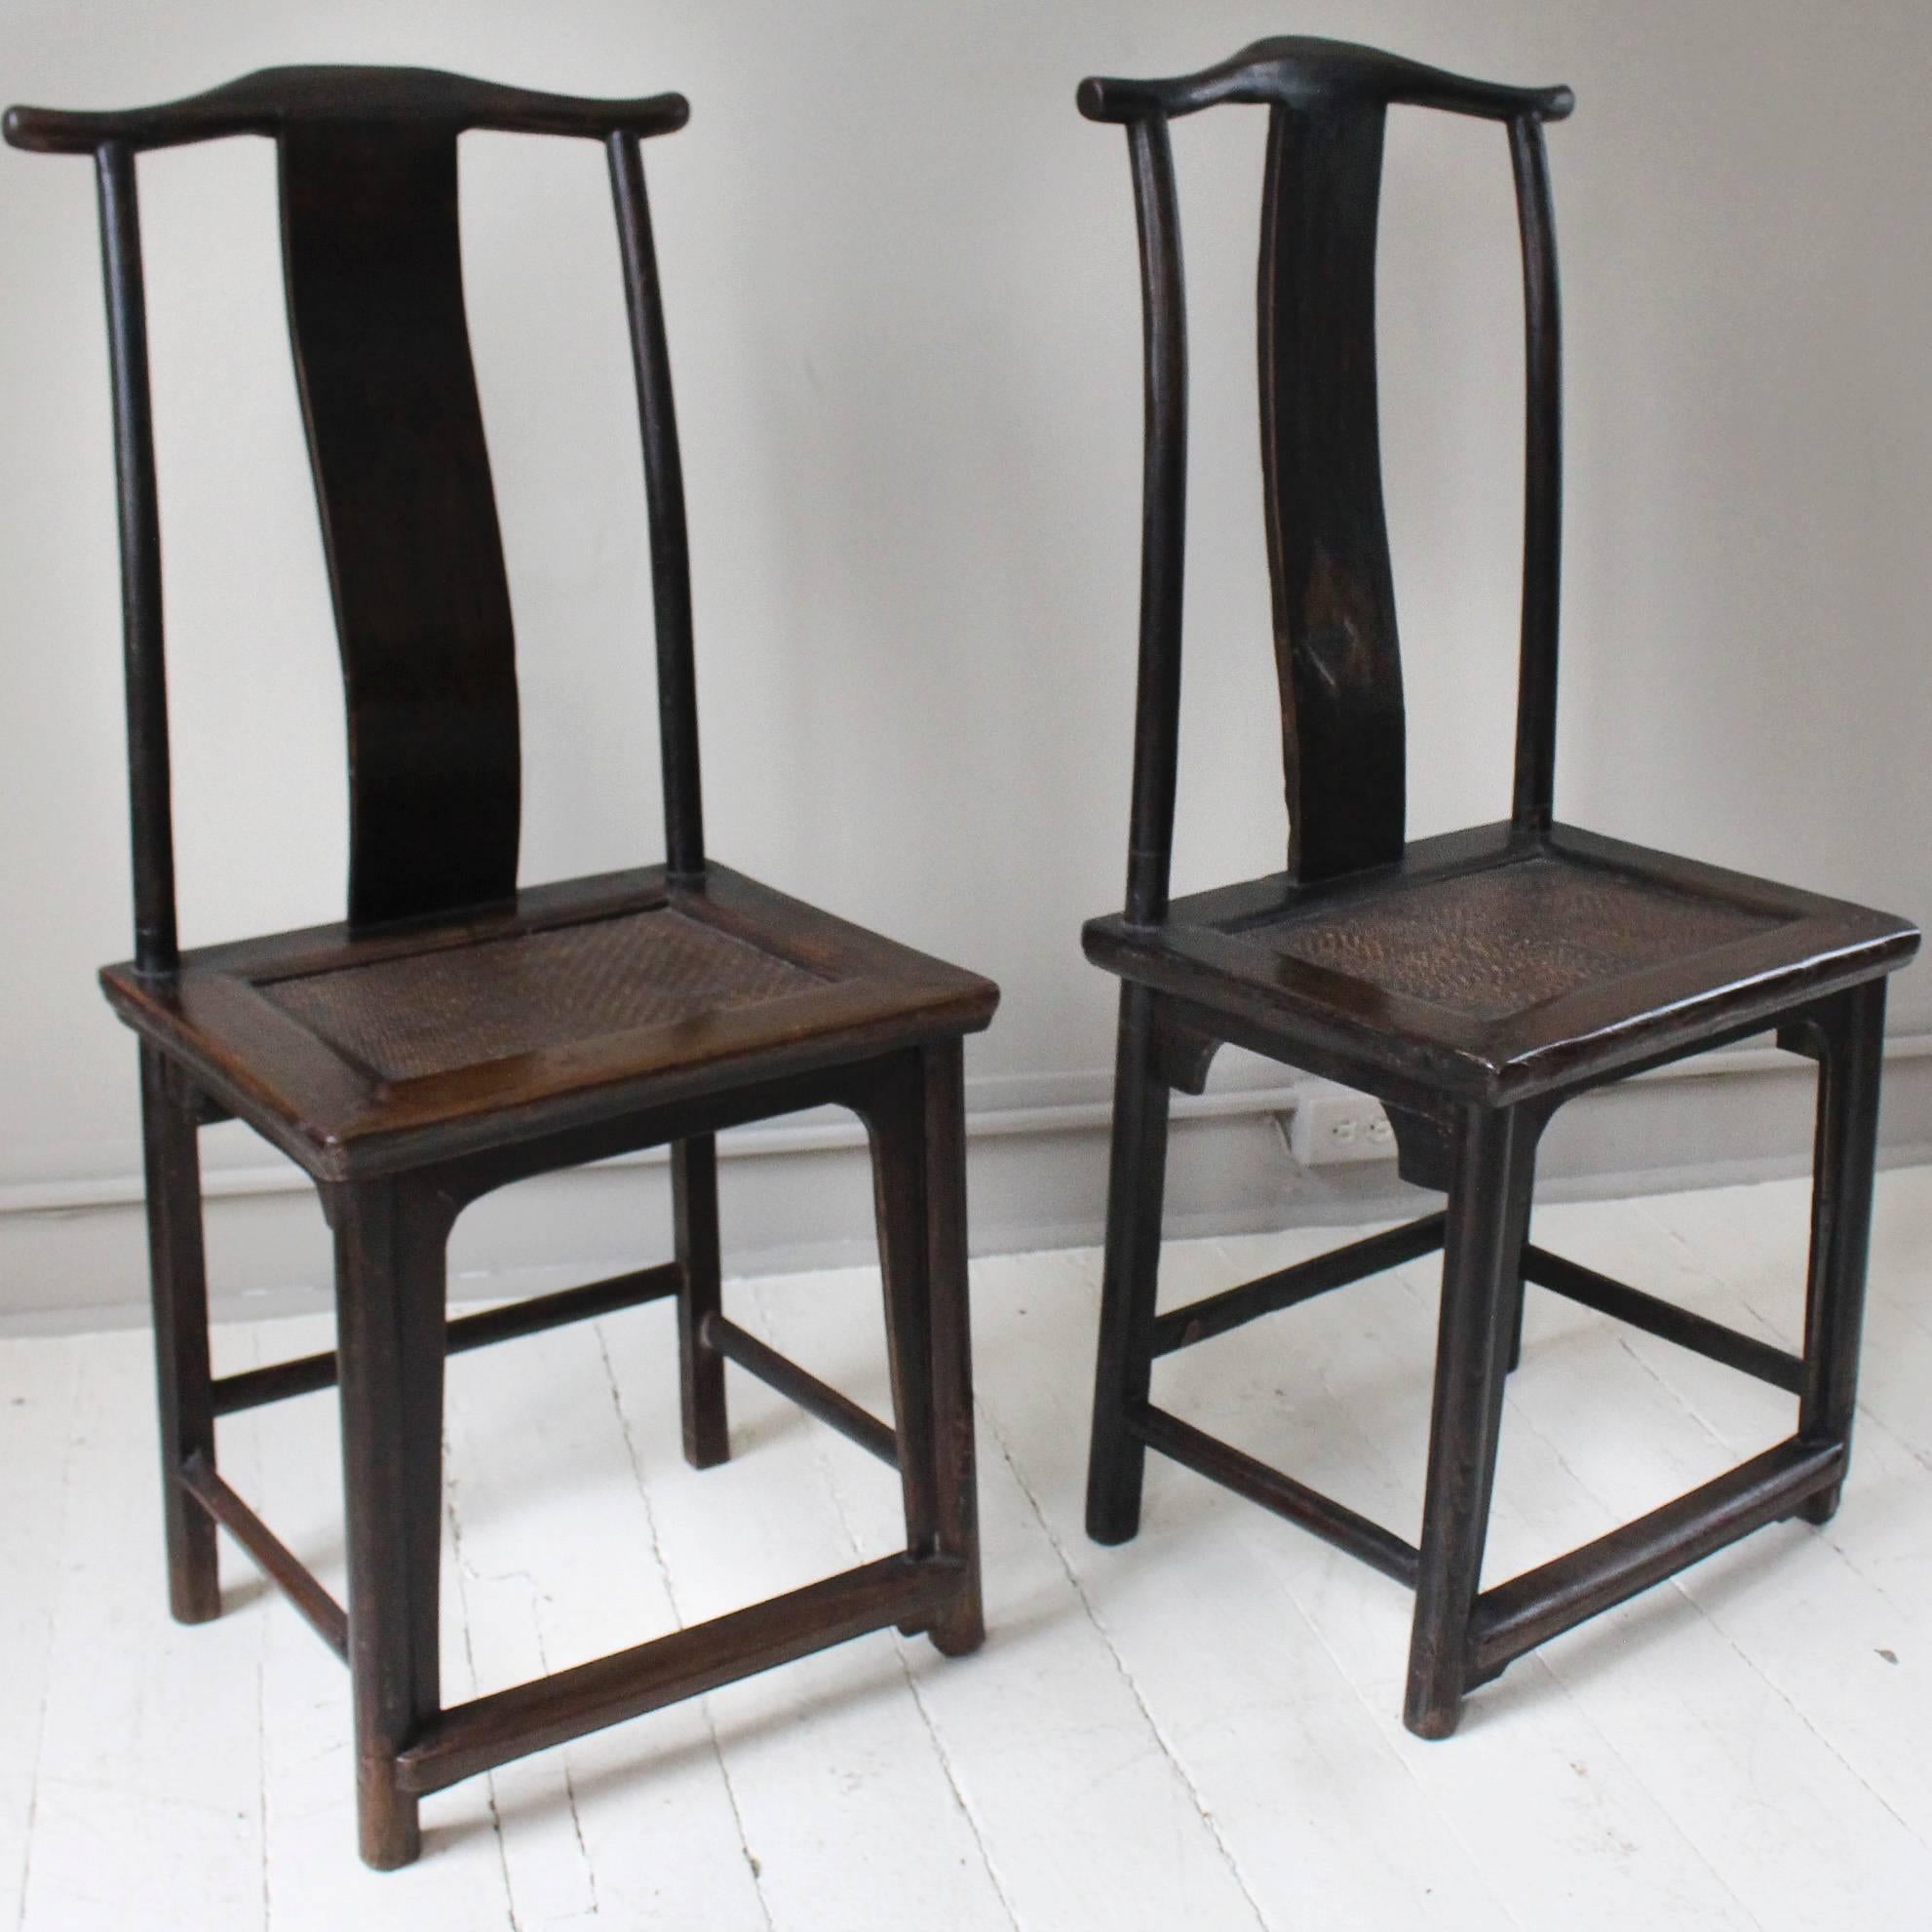 Pair of elmwood, 19th century, Chinese chairs with wide center splats culminating in typical oxen yoke top crest rails and inset woven cane seats. Void of carvings, the chairs have an unadorned simplicity and a wonderful timeworn parina.
  